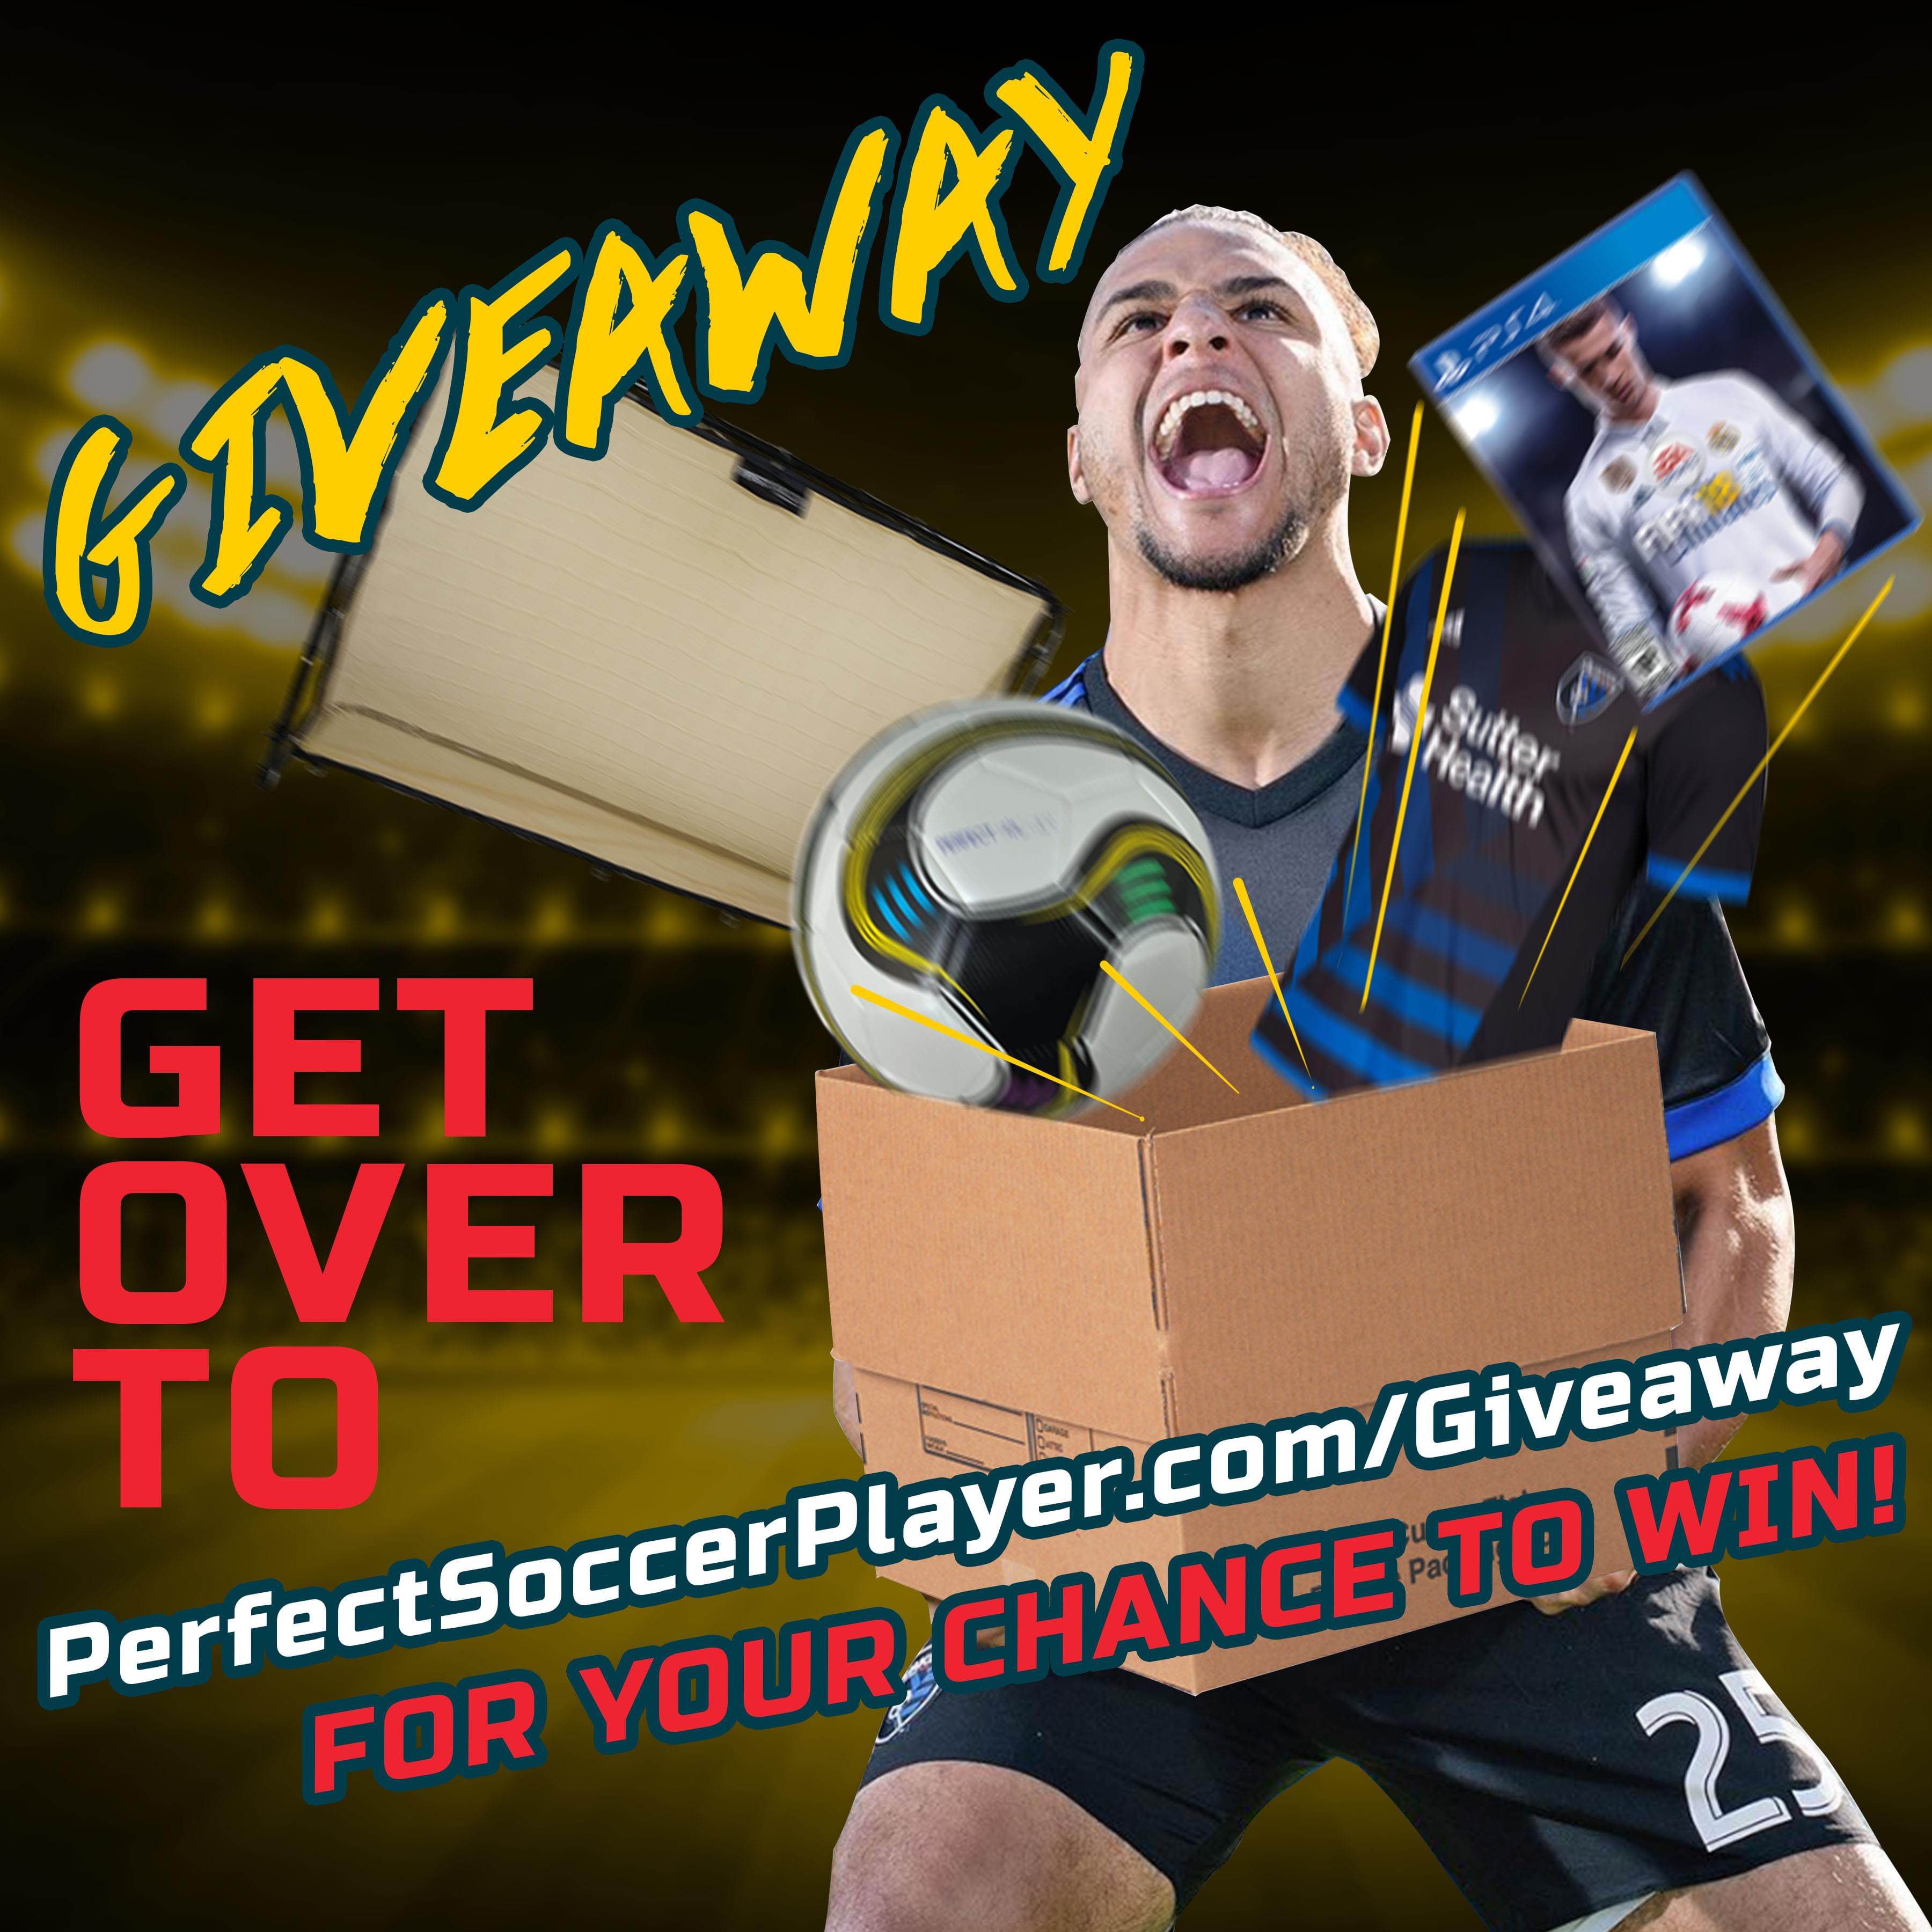 The Perfect Soccer Giveaway Page!